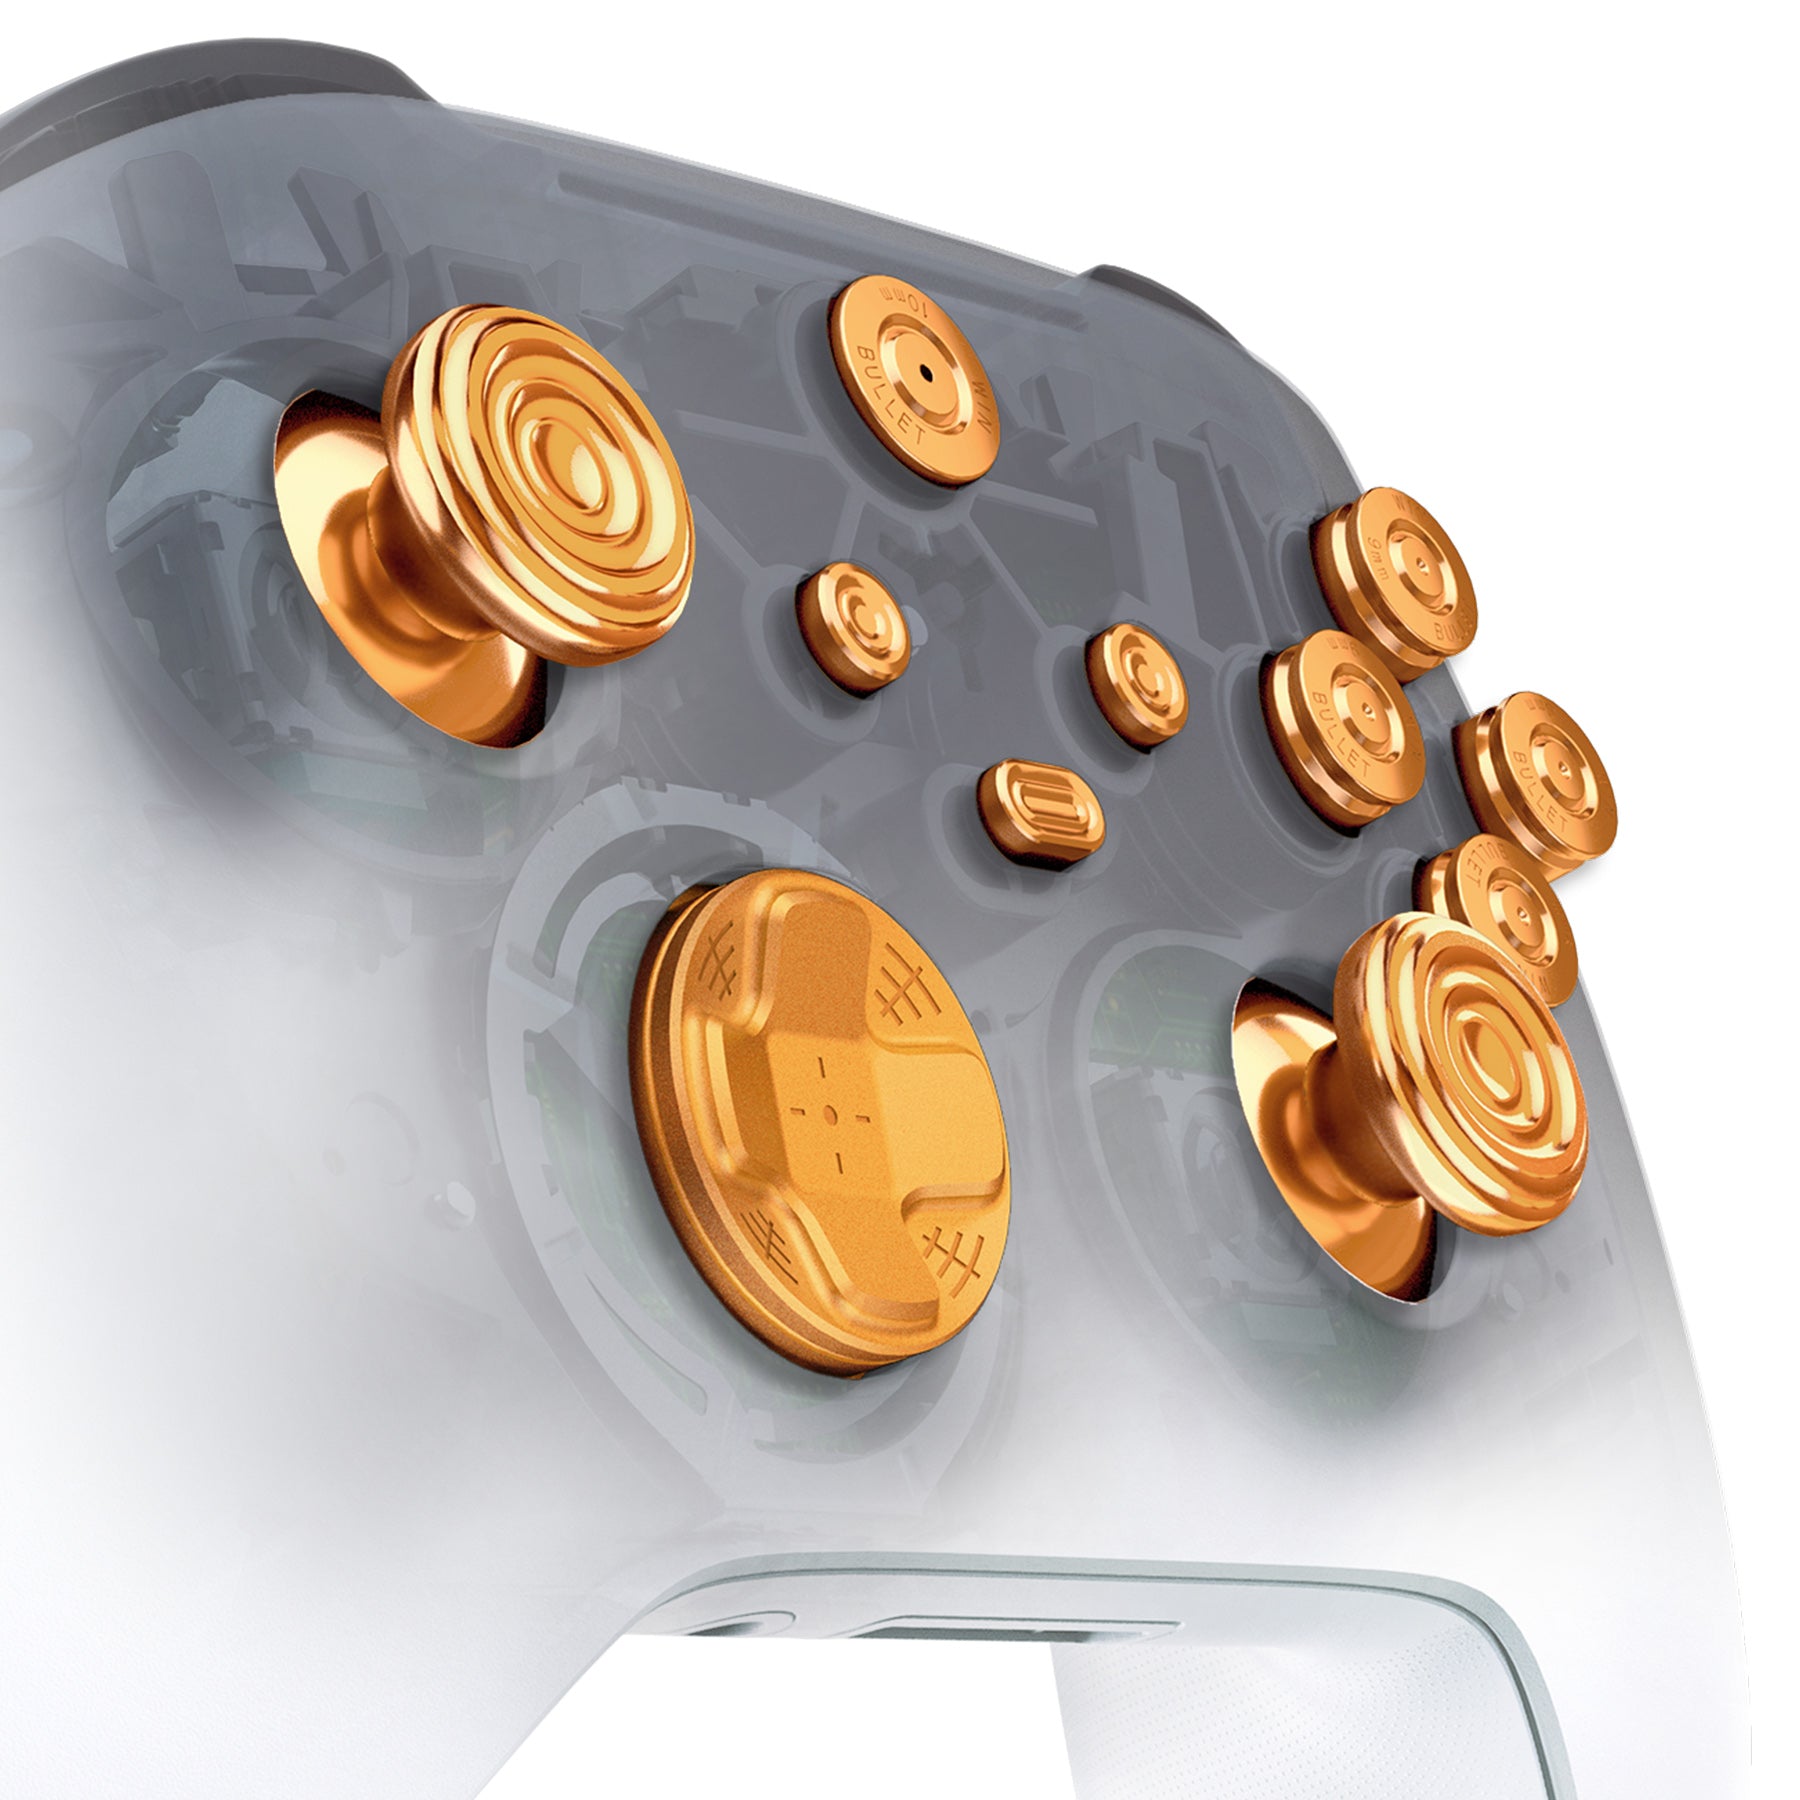 Gold Metal Buttons